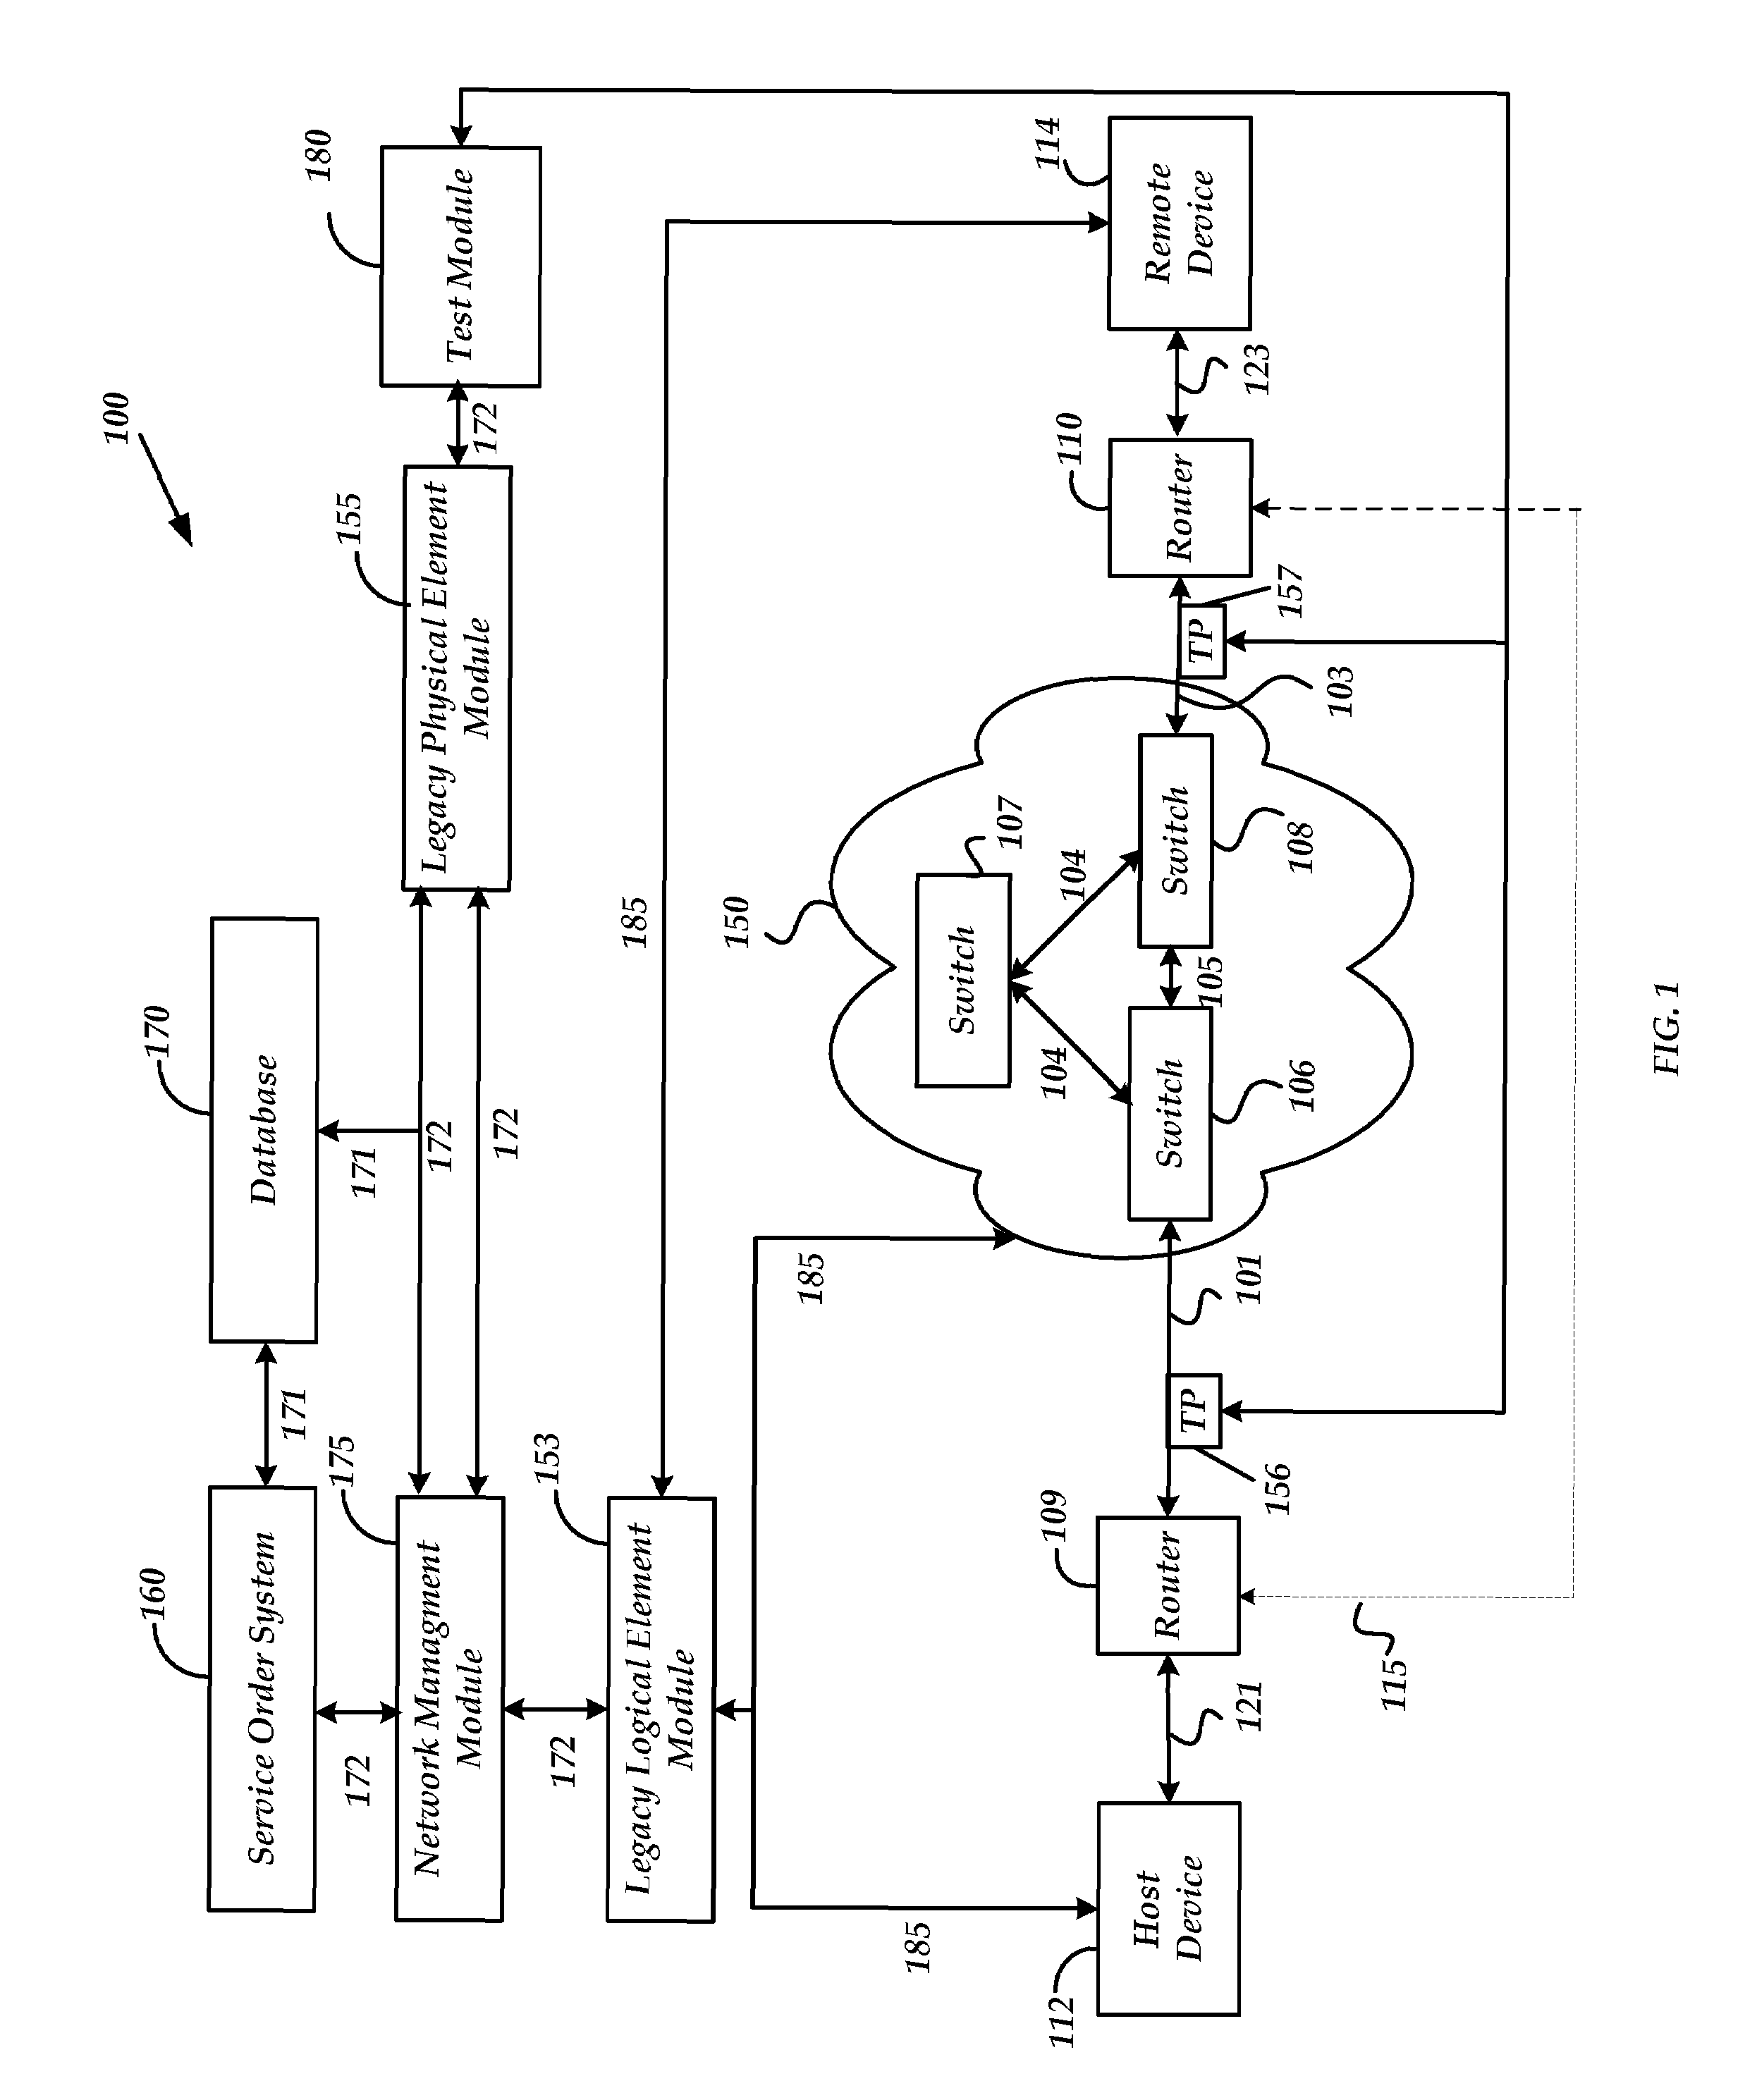 Method and system for obtaining logical performance data for a circuit in a data network